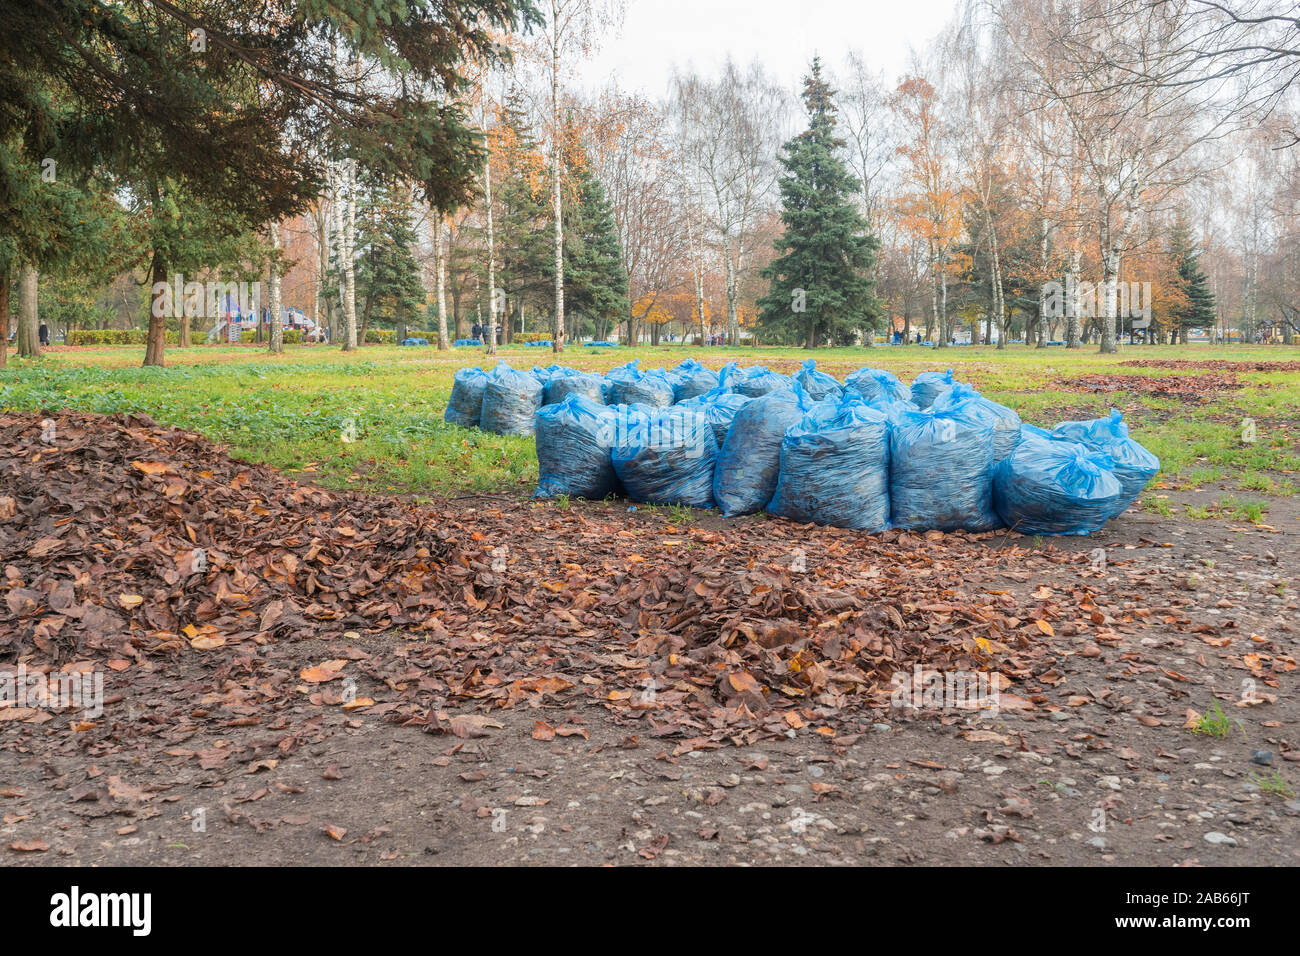 https://c8.alamy.com/comp/2AB66JT/many-blue-plastic-bags-with-garbage-near-pile-of-fallen-leaves-lies-under-trees-in-city-park-2AB66JT.jpg